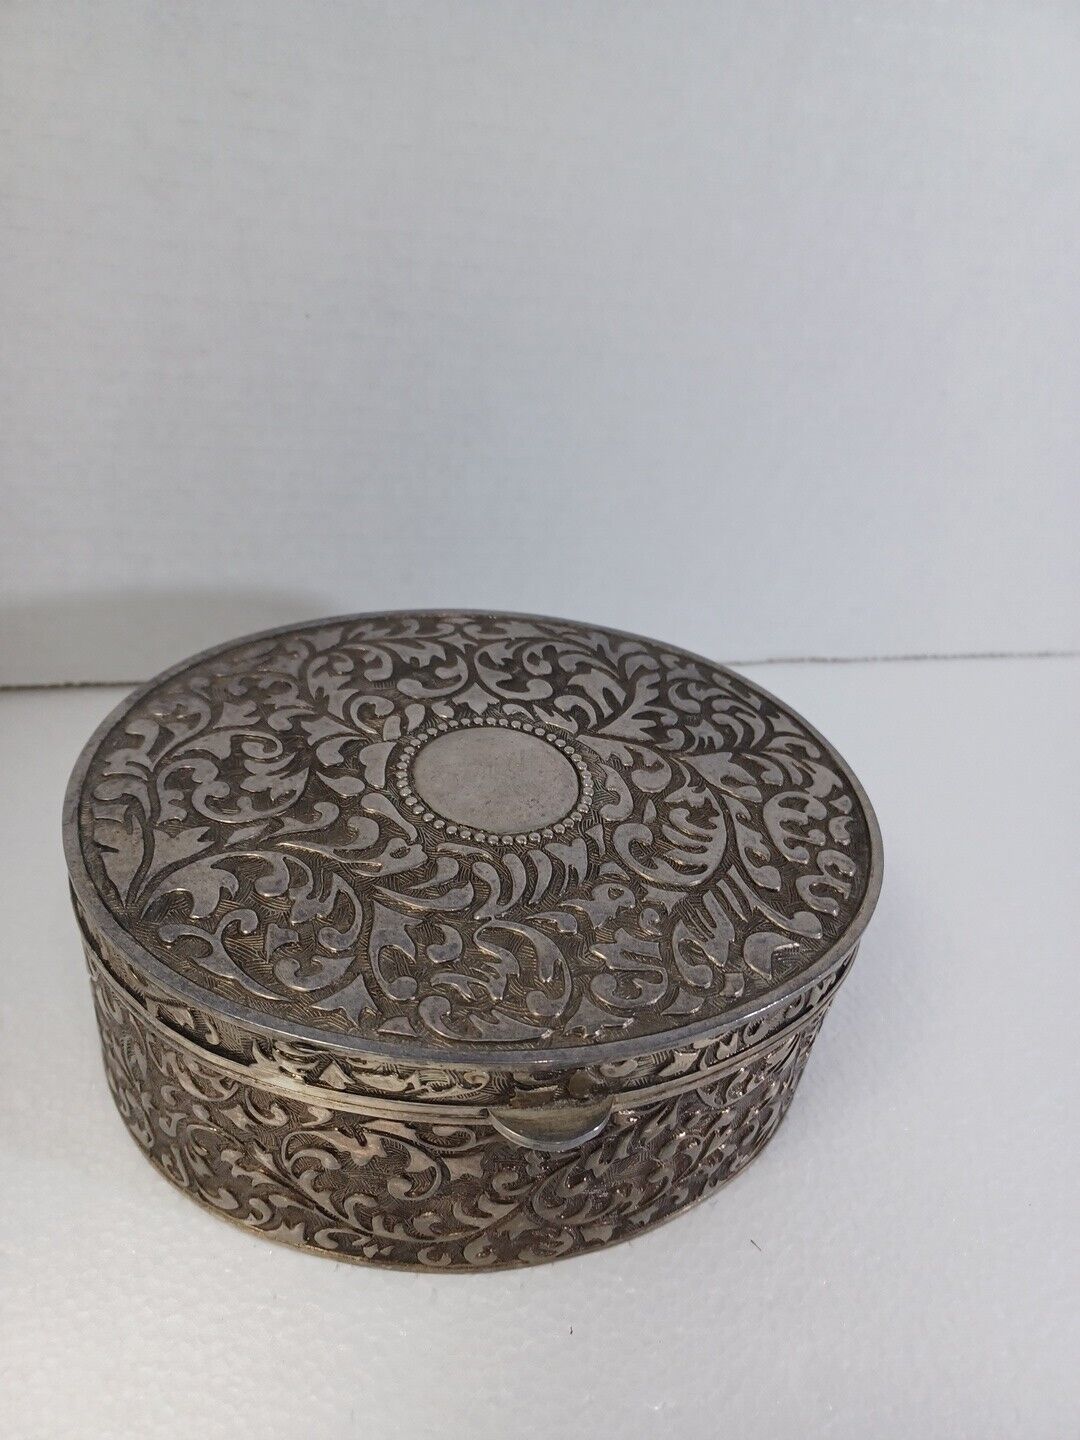 Vintage  Larger Jewelry Trinket Box Silver colored Lined Silver Burgandy 3\